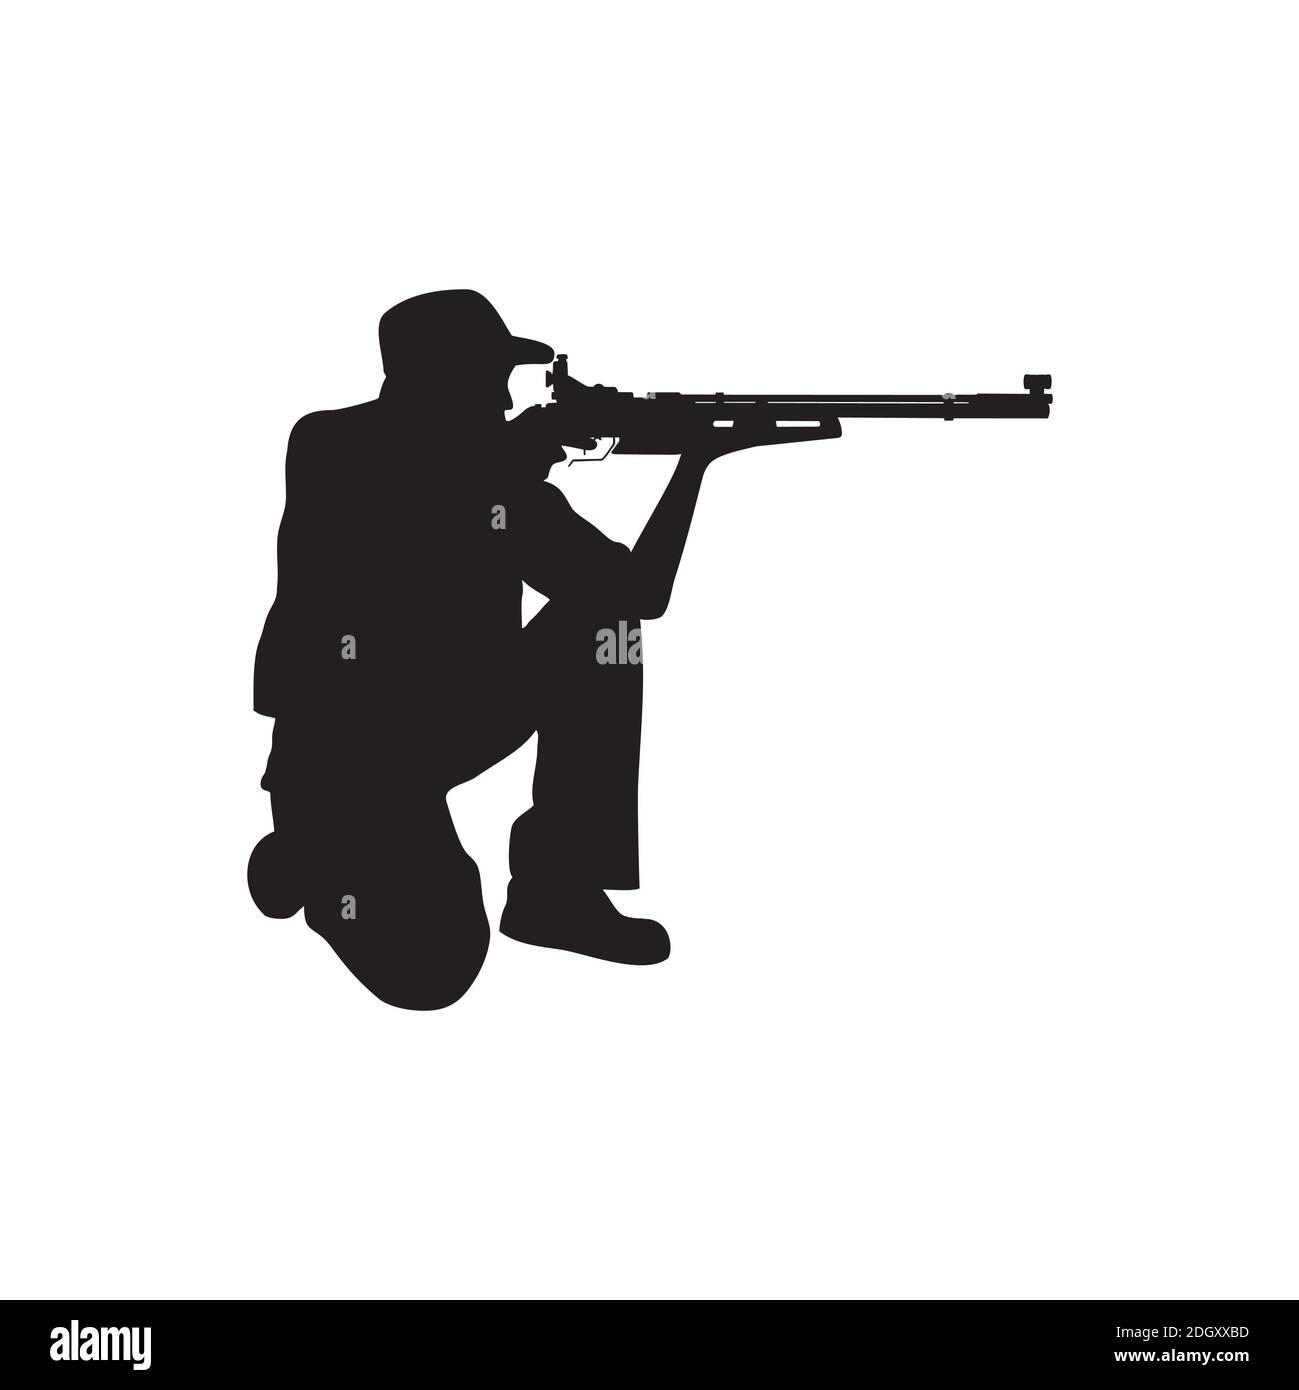 Silhouette of air rifle shooter kneeling Position design illustration Stock Vector